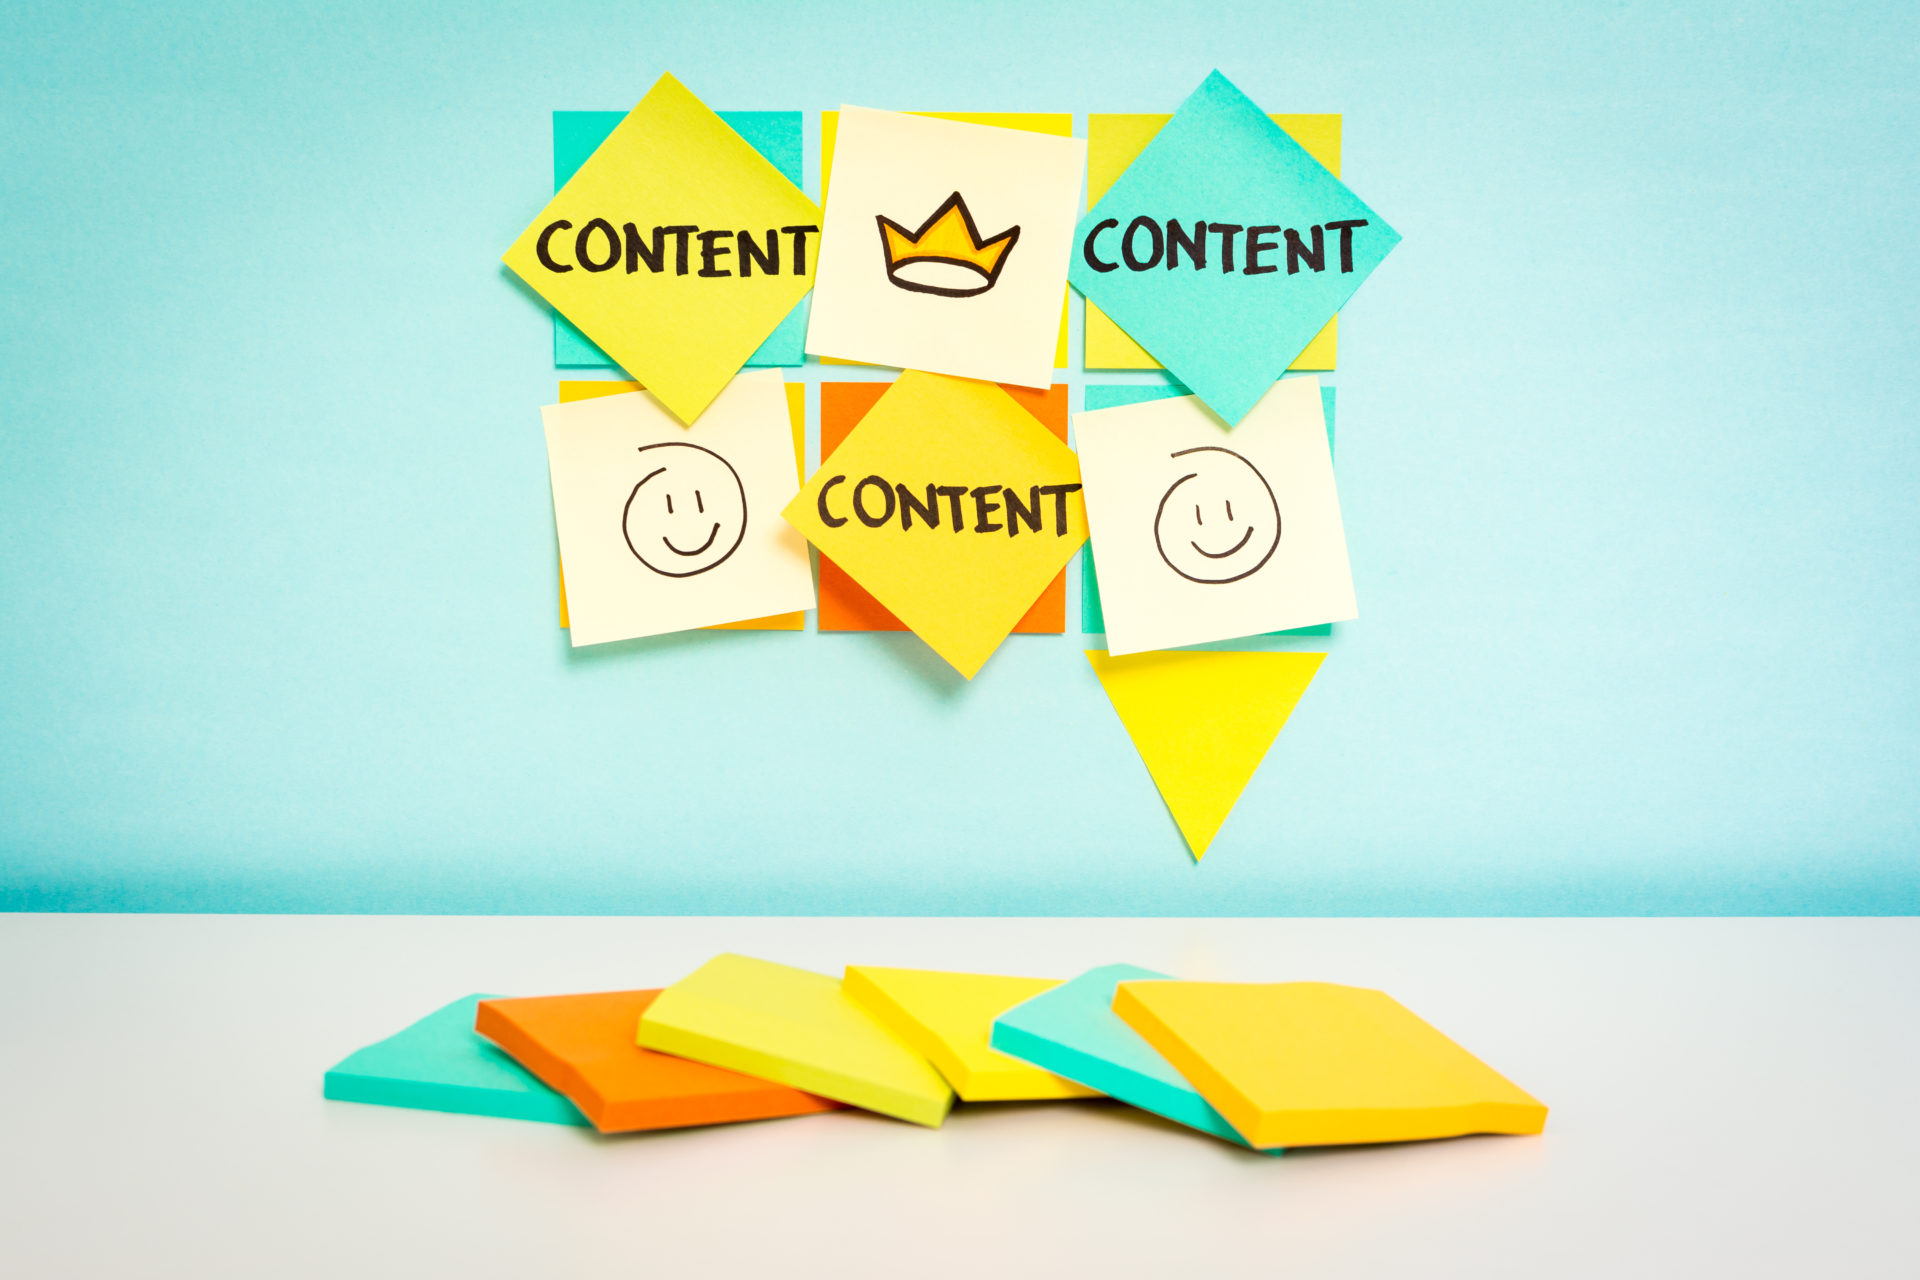 Content—the New Marketing Term Being Throwing Around with Unbridled Glee